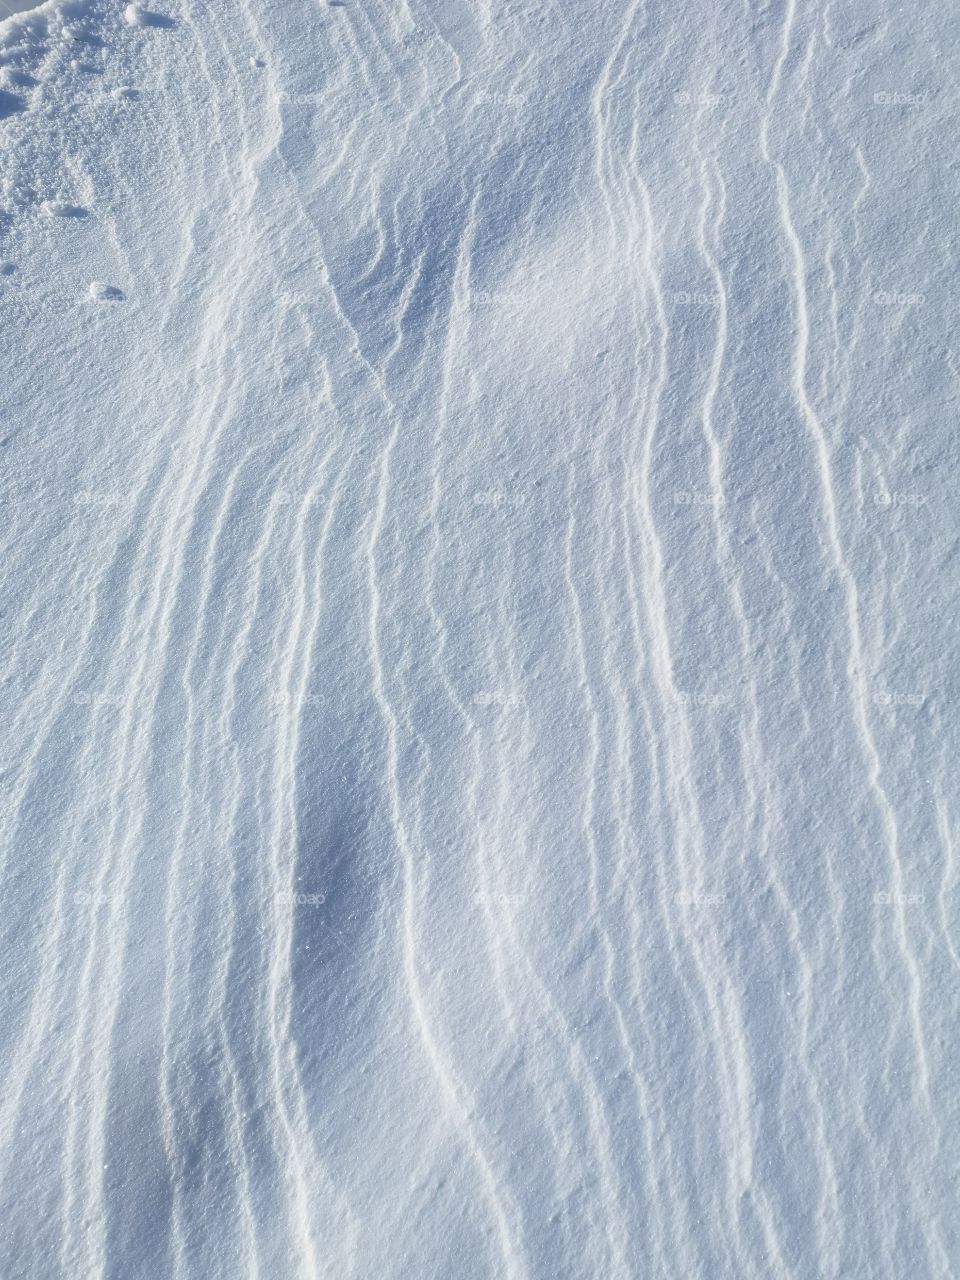 snow blown wind patterns on a snowy Canadian winter day . very cold windy icey natural wind patterns